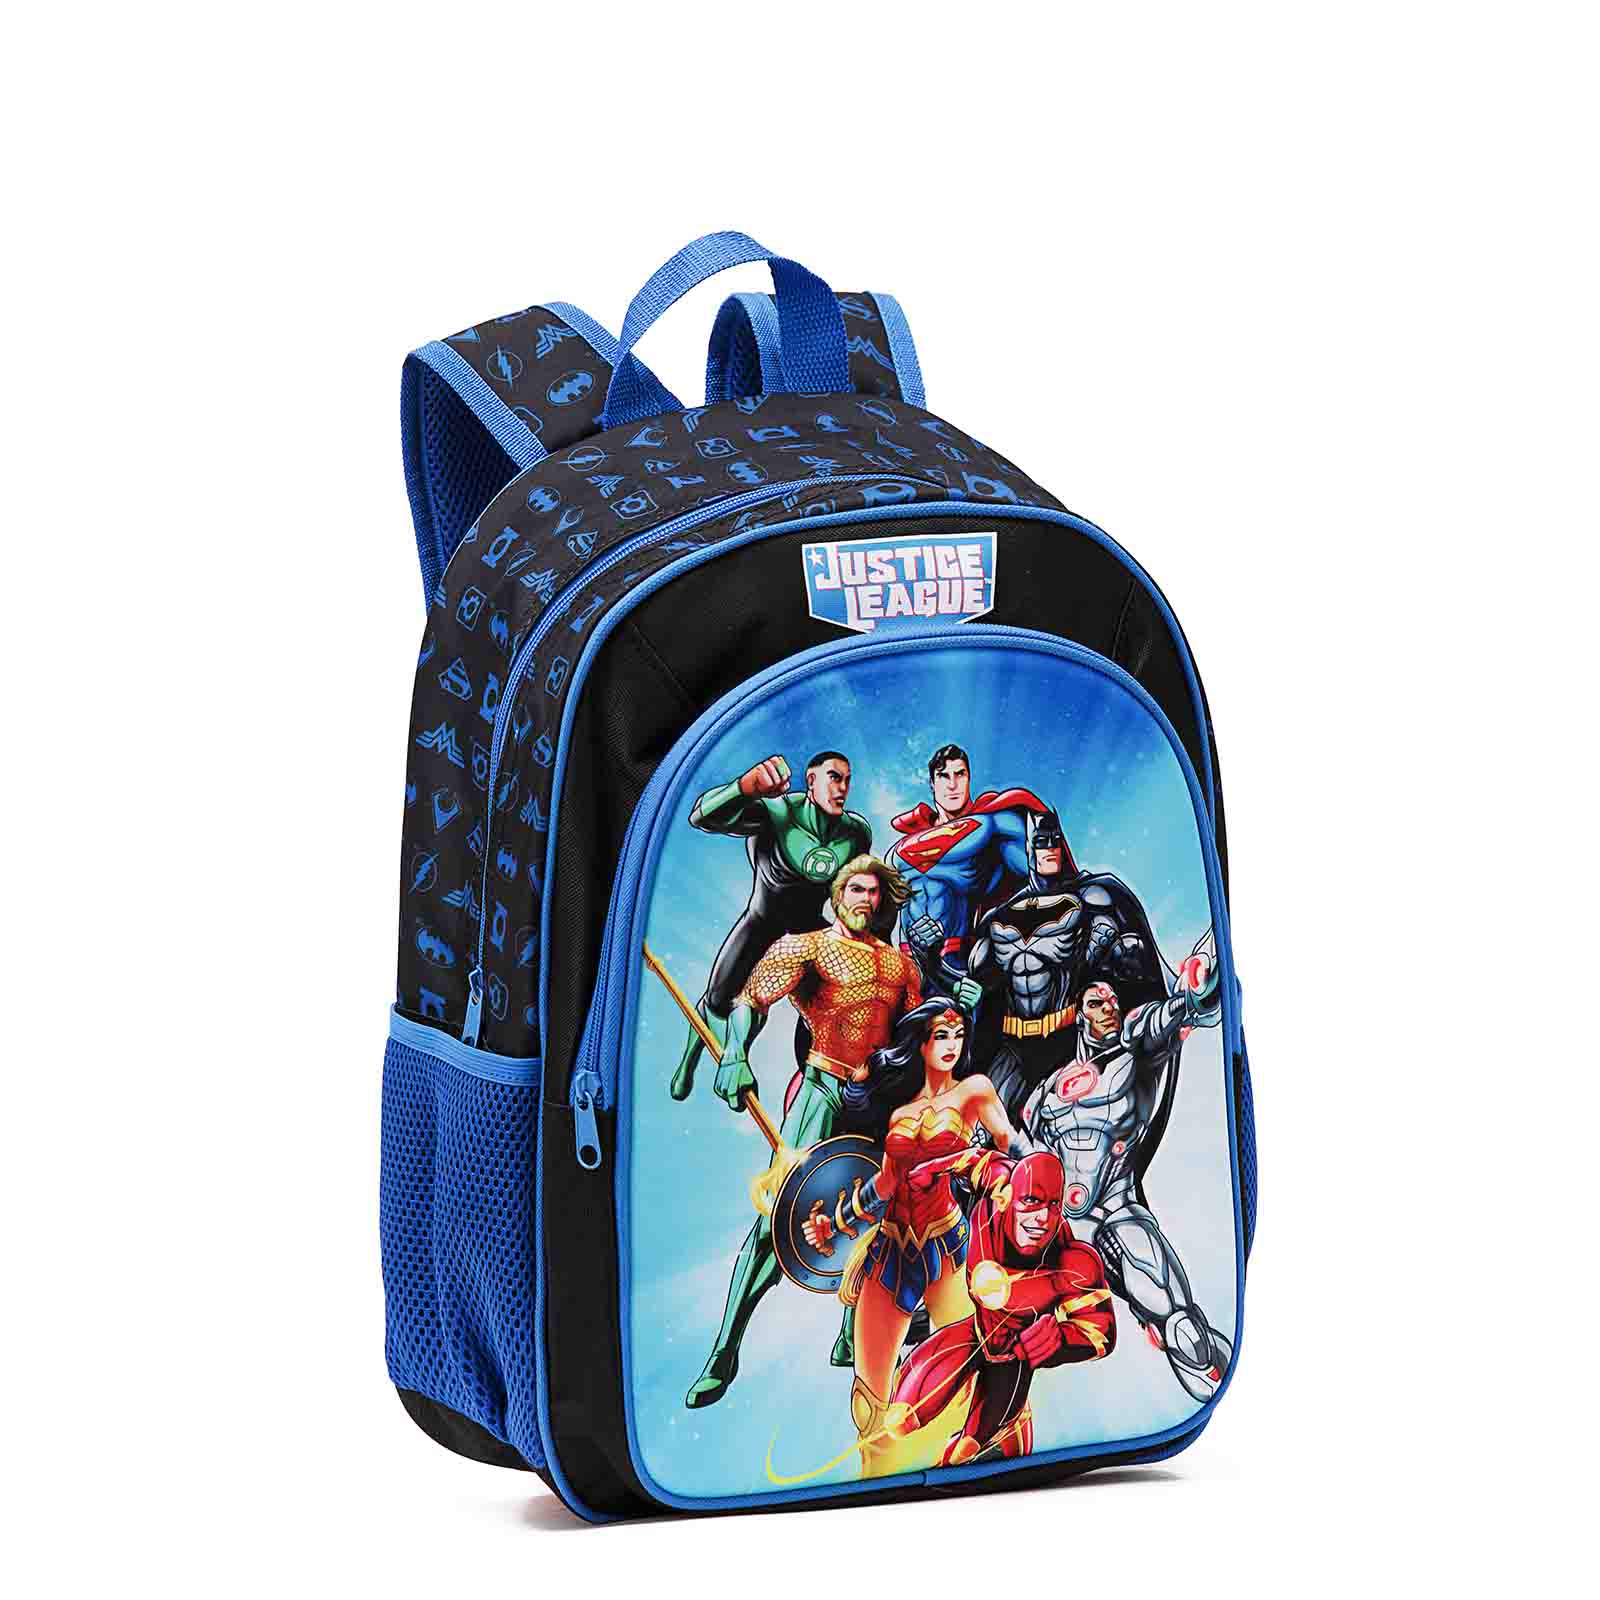 Warner-Brothers-Justice-League-15inch-Backpack-Front